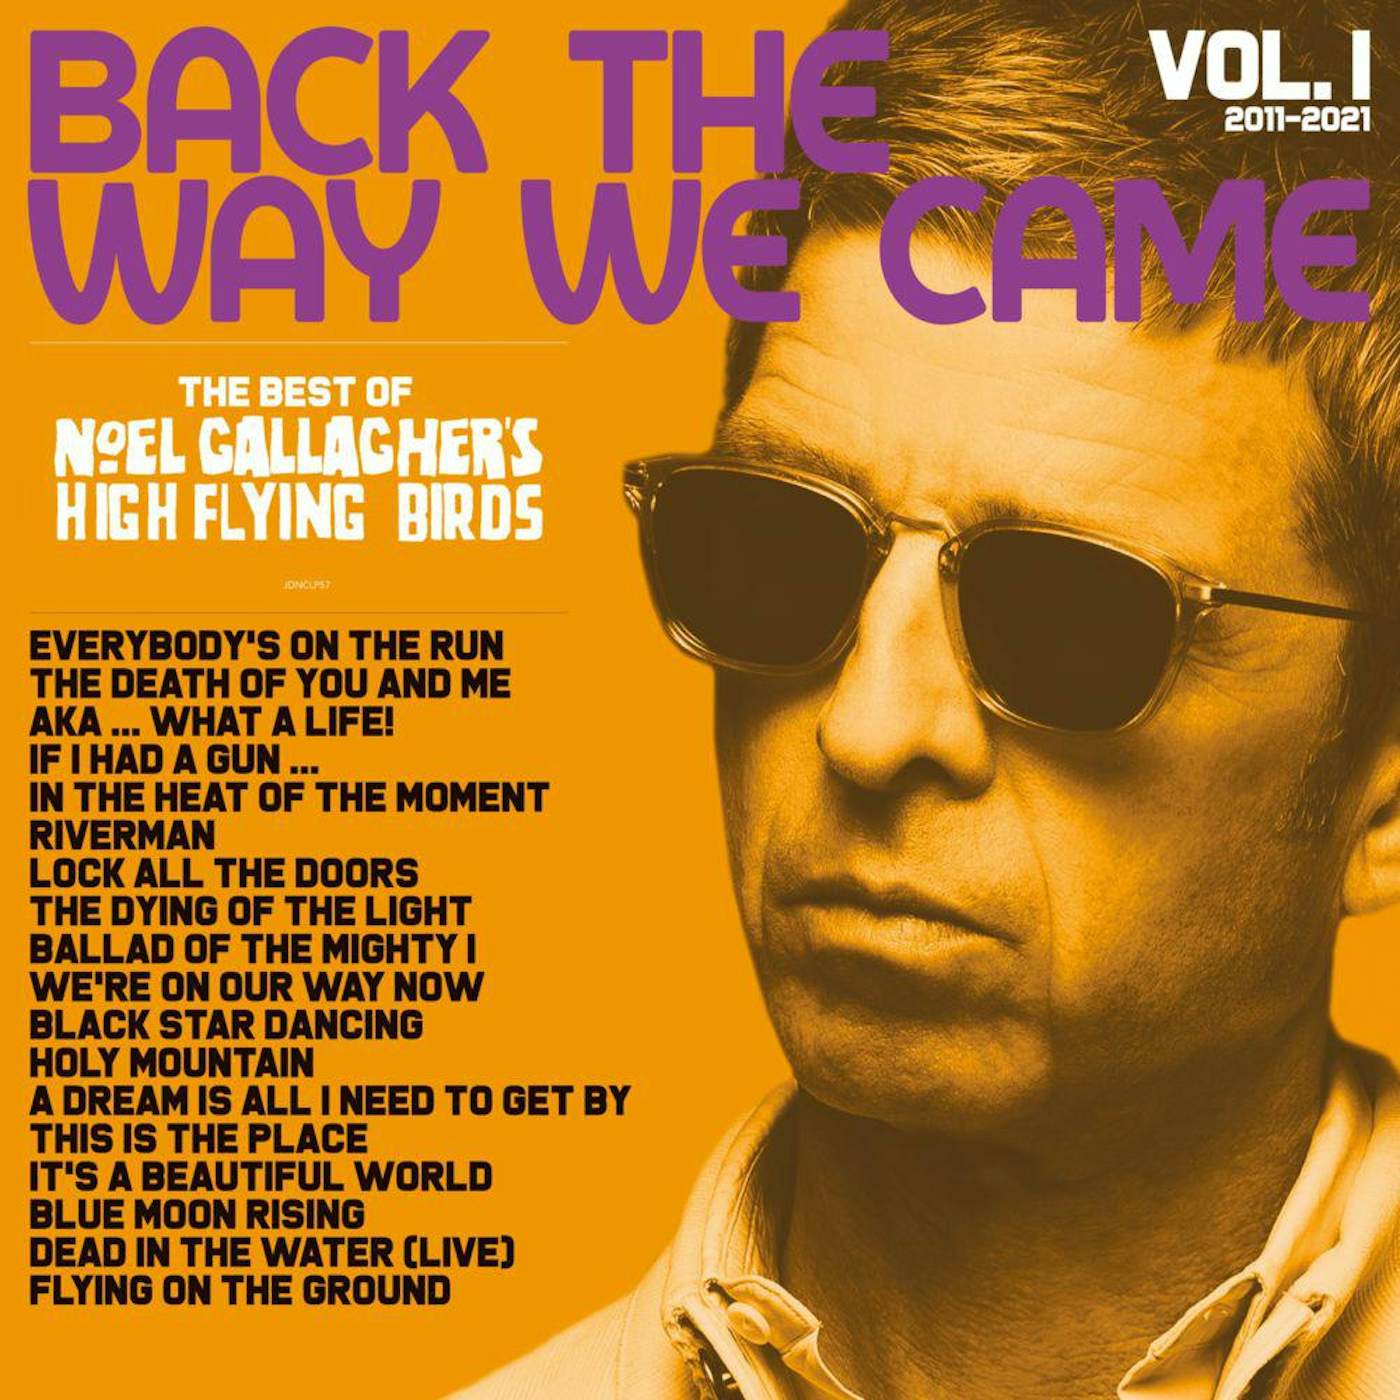 Noel Gallagher's High Flying Birds Back The Way We Came: Vol. 1 (2011   202 Vinyl Record